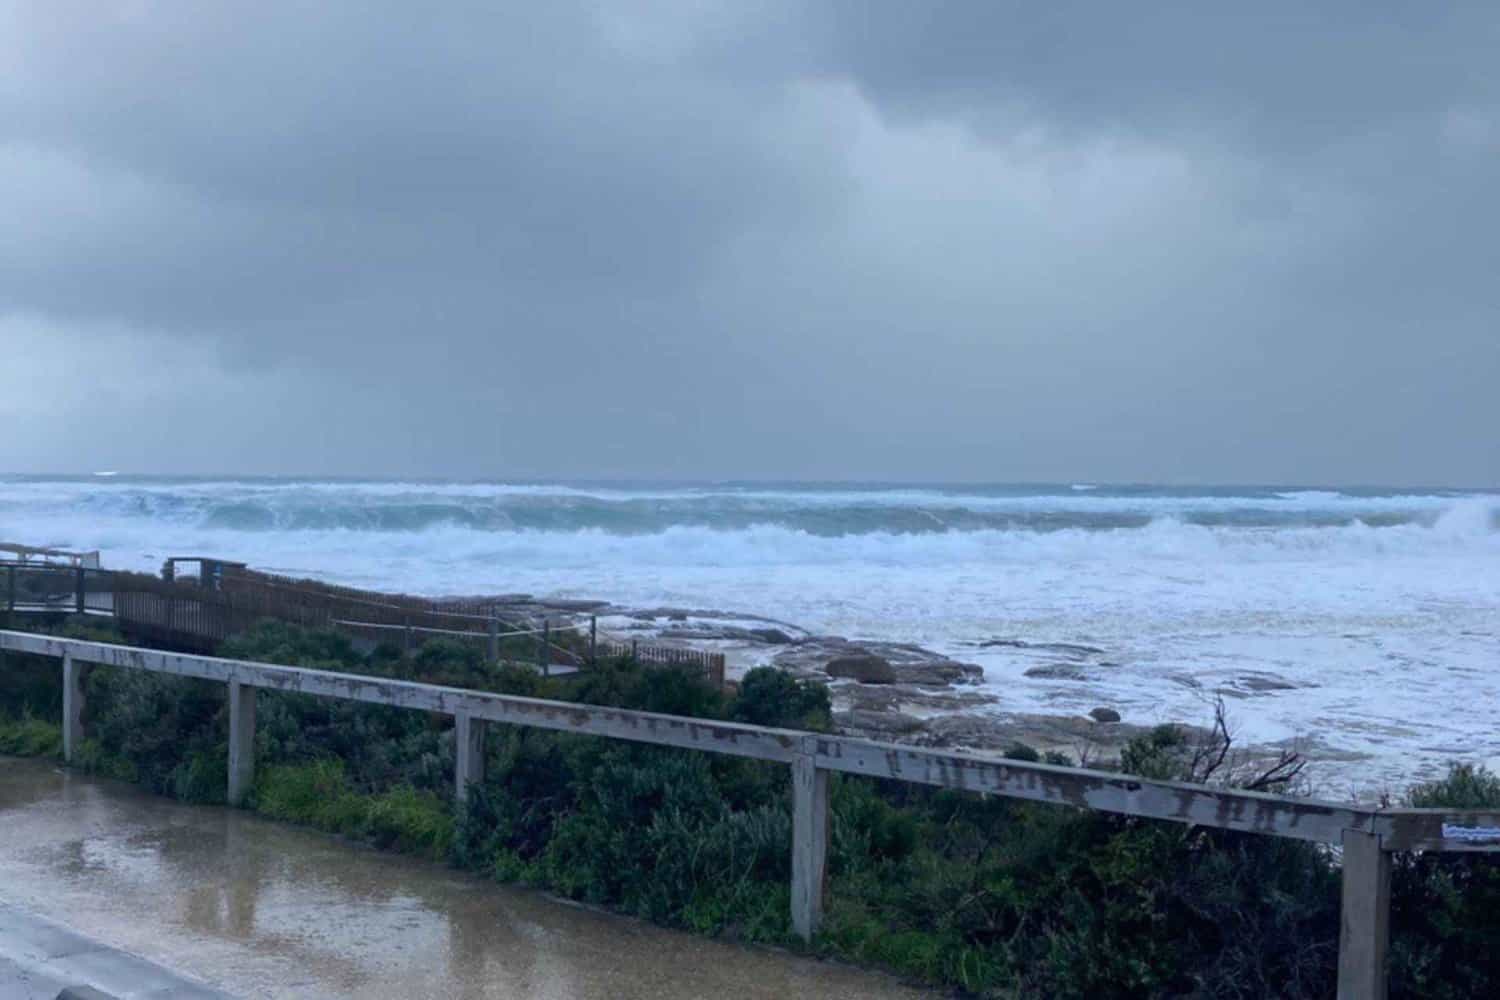 A stormy sky casts a dramatic backdrop over the rough, foamy waves of a Margaret River beach, as seen from a coastal walkway lined with a wooden railing, reflecting the beach's wild beauty during tumultuous weather